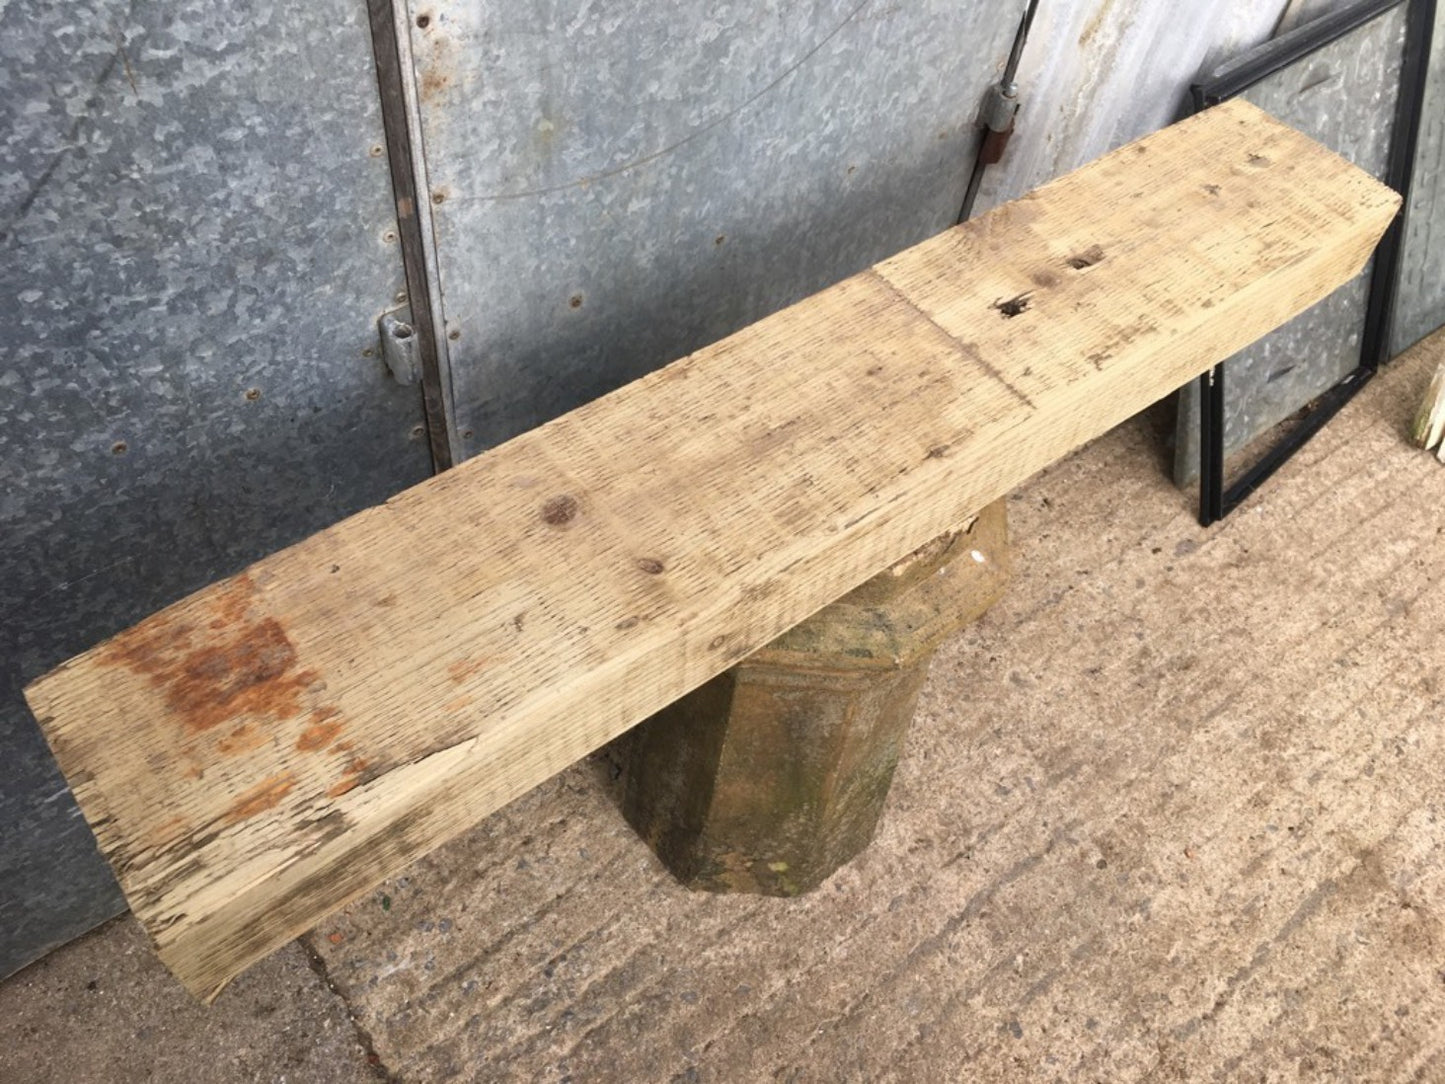 3ft 10 3/8" Or 1.18m Long Old Salvaged Solid Pine Beam